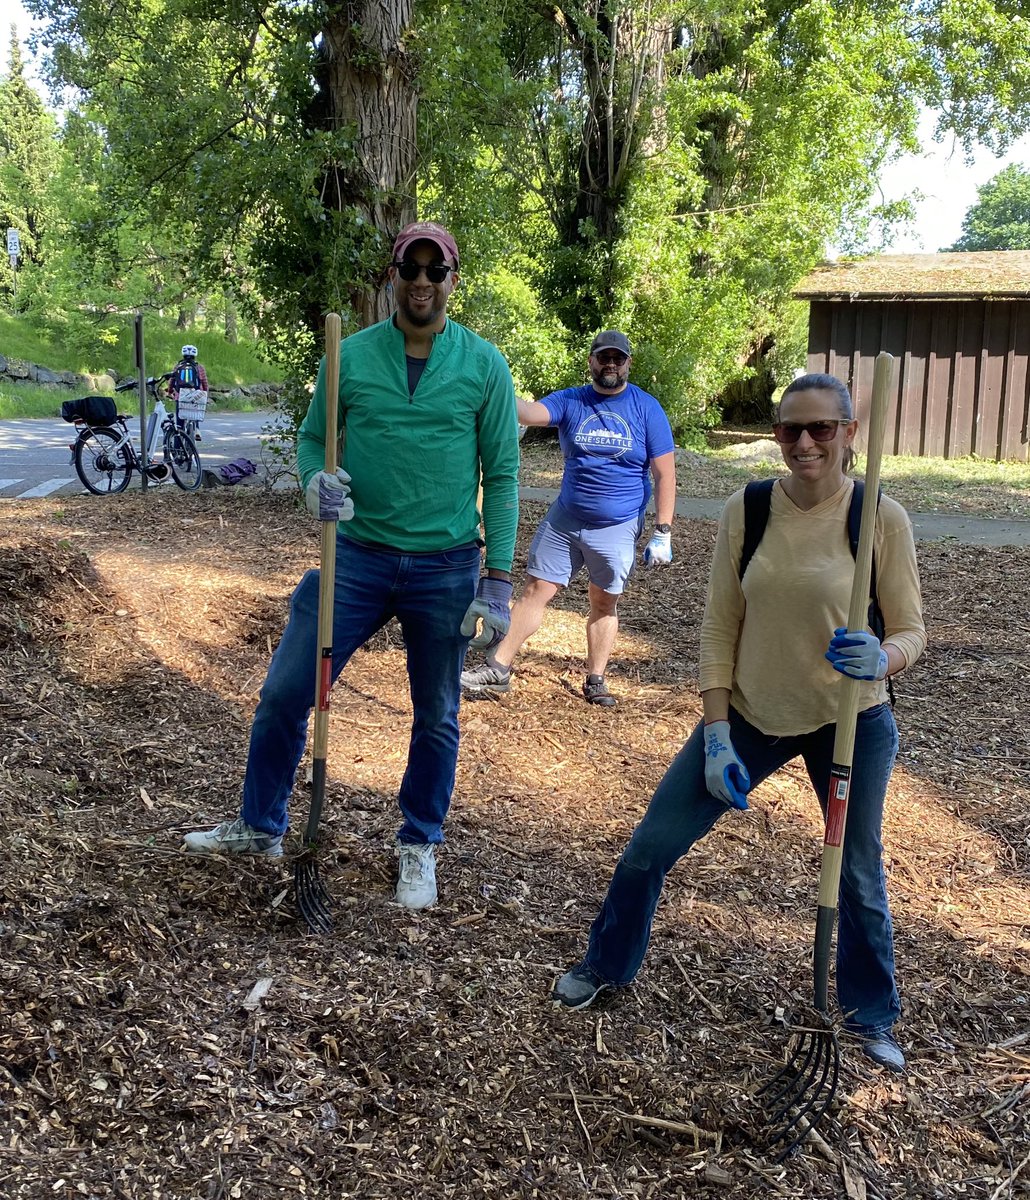 Sometimes being a public servant means getting your hands literally dirty. Great to support the #OneSeattle #DayofService! Thank you @MayorofSeattle and team for organizing this event. @WDWAnews is out here in force!